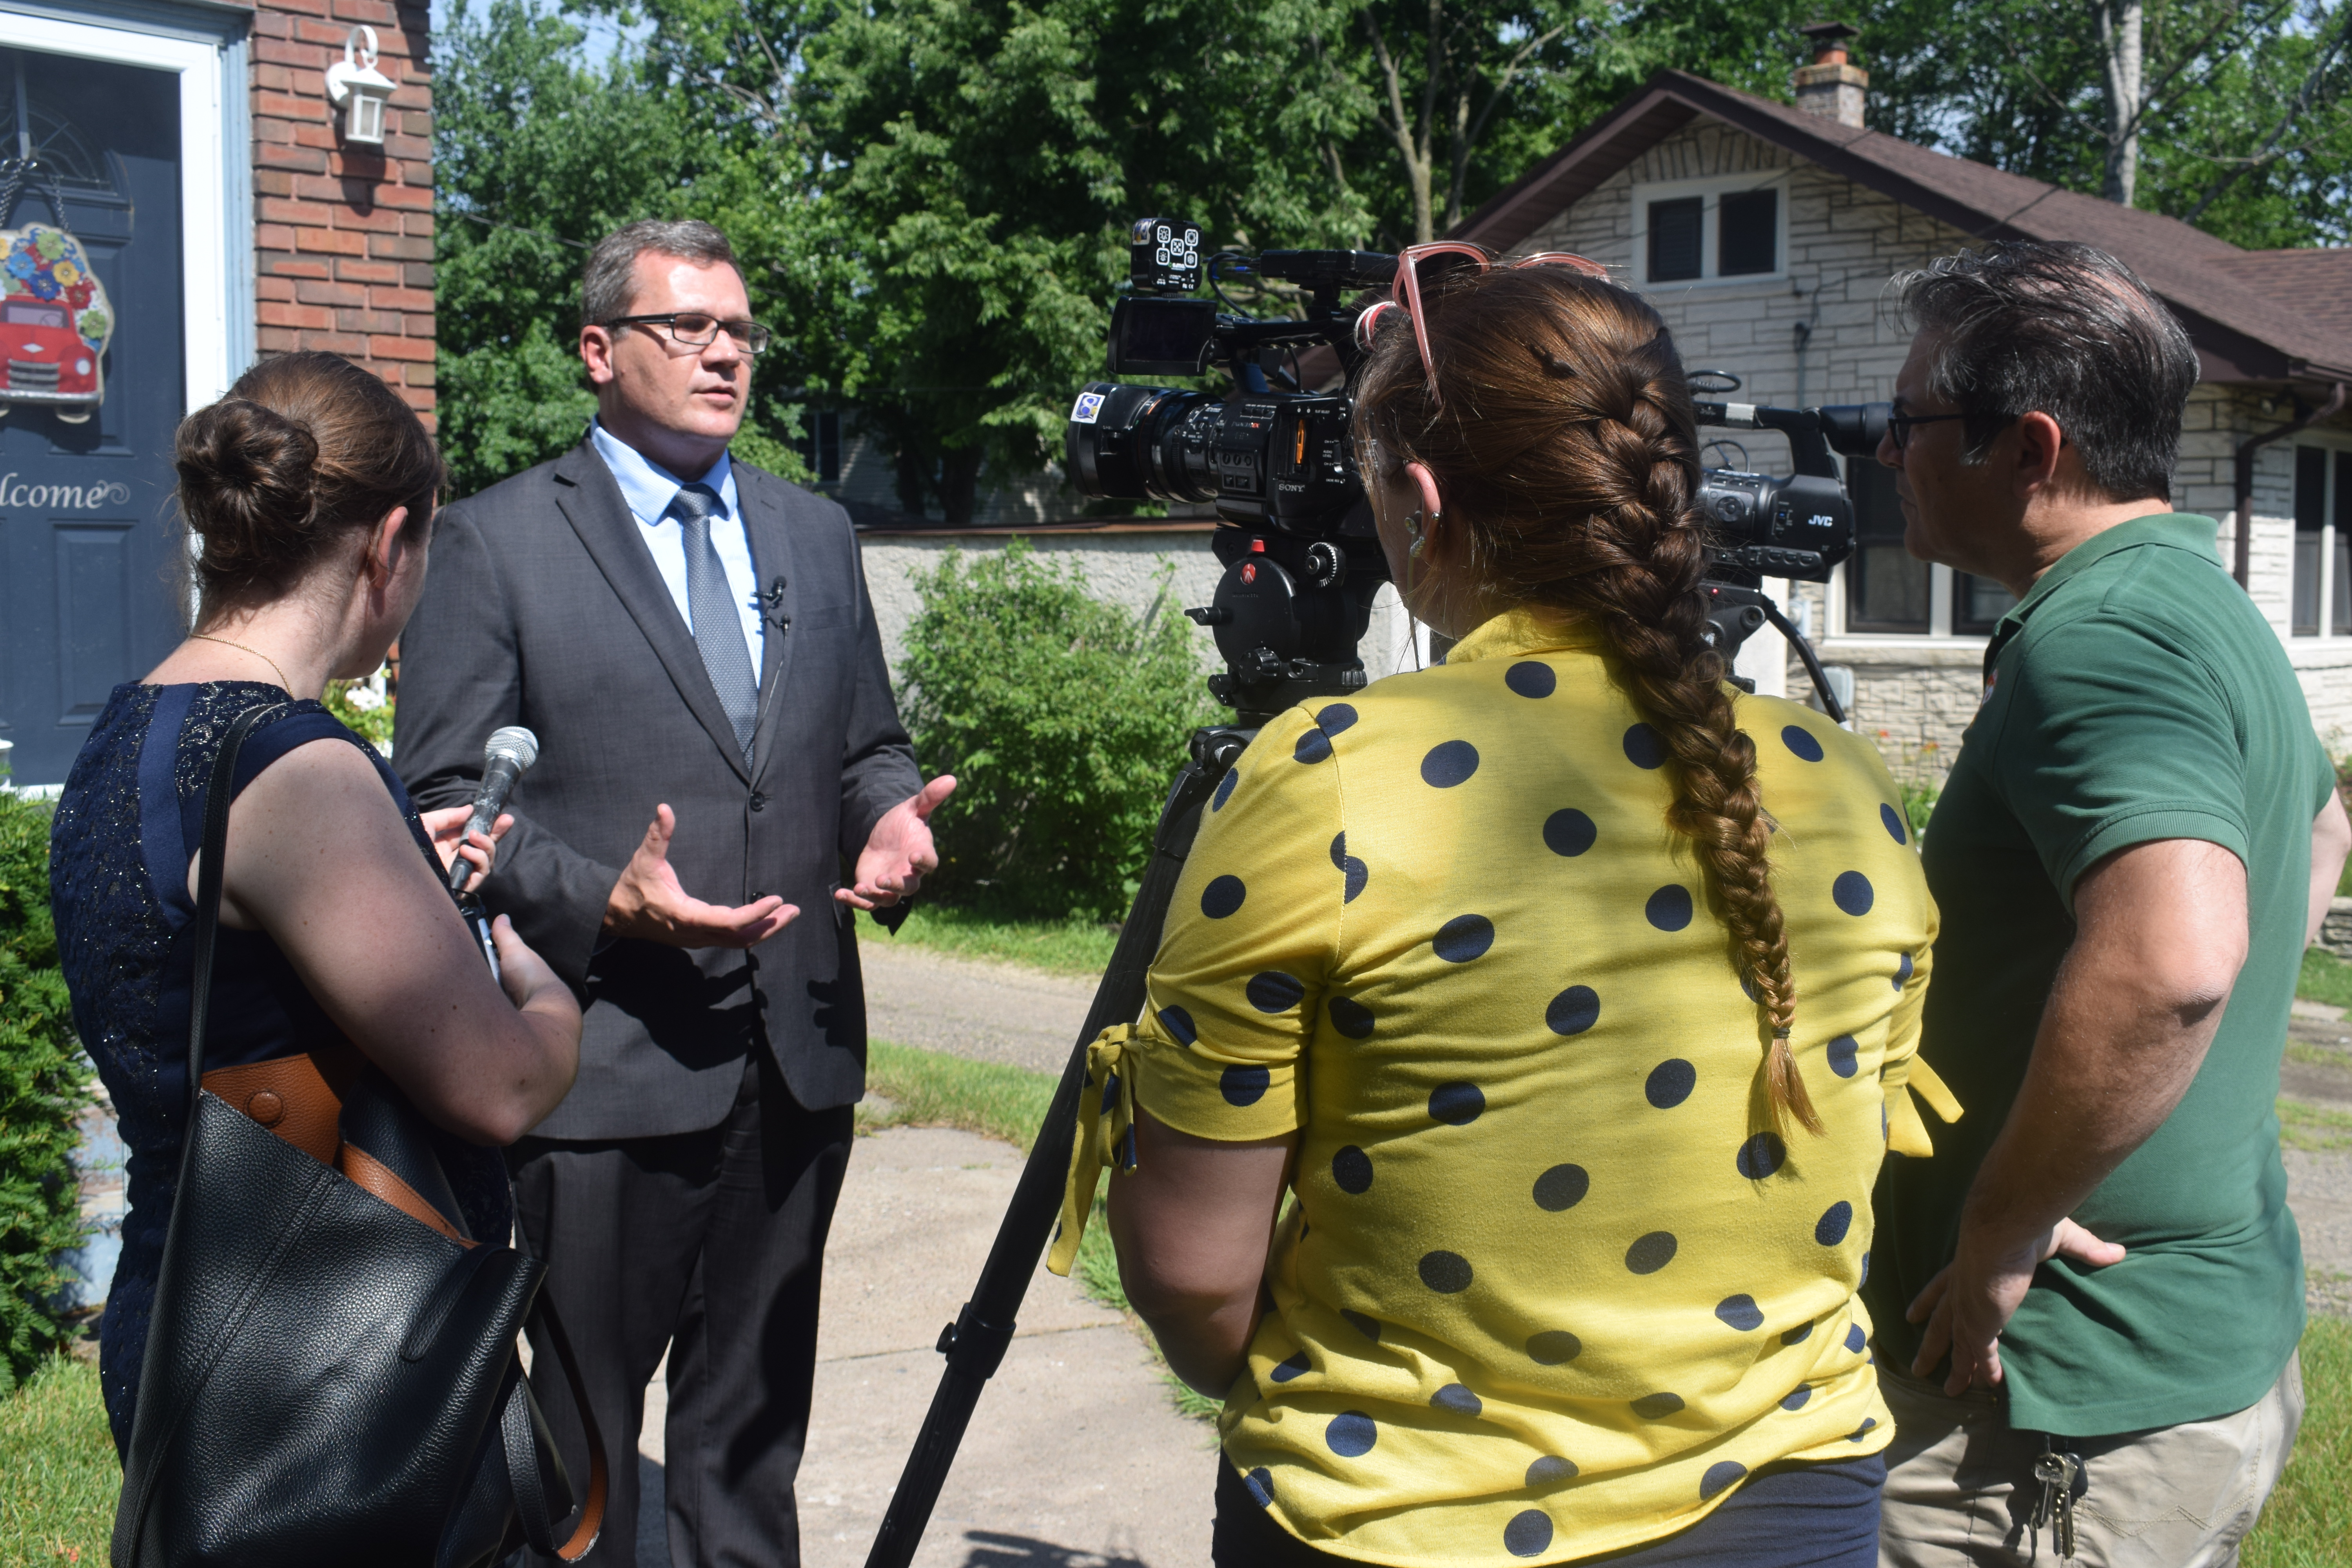 A man in a suit stands in front of a house surrounded by two reporters and a camera man. His hands gesture as he speaks with them.